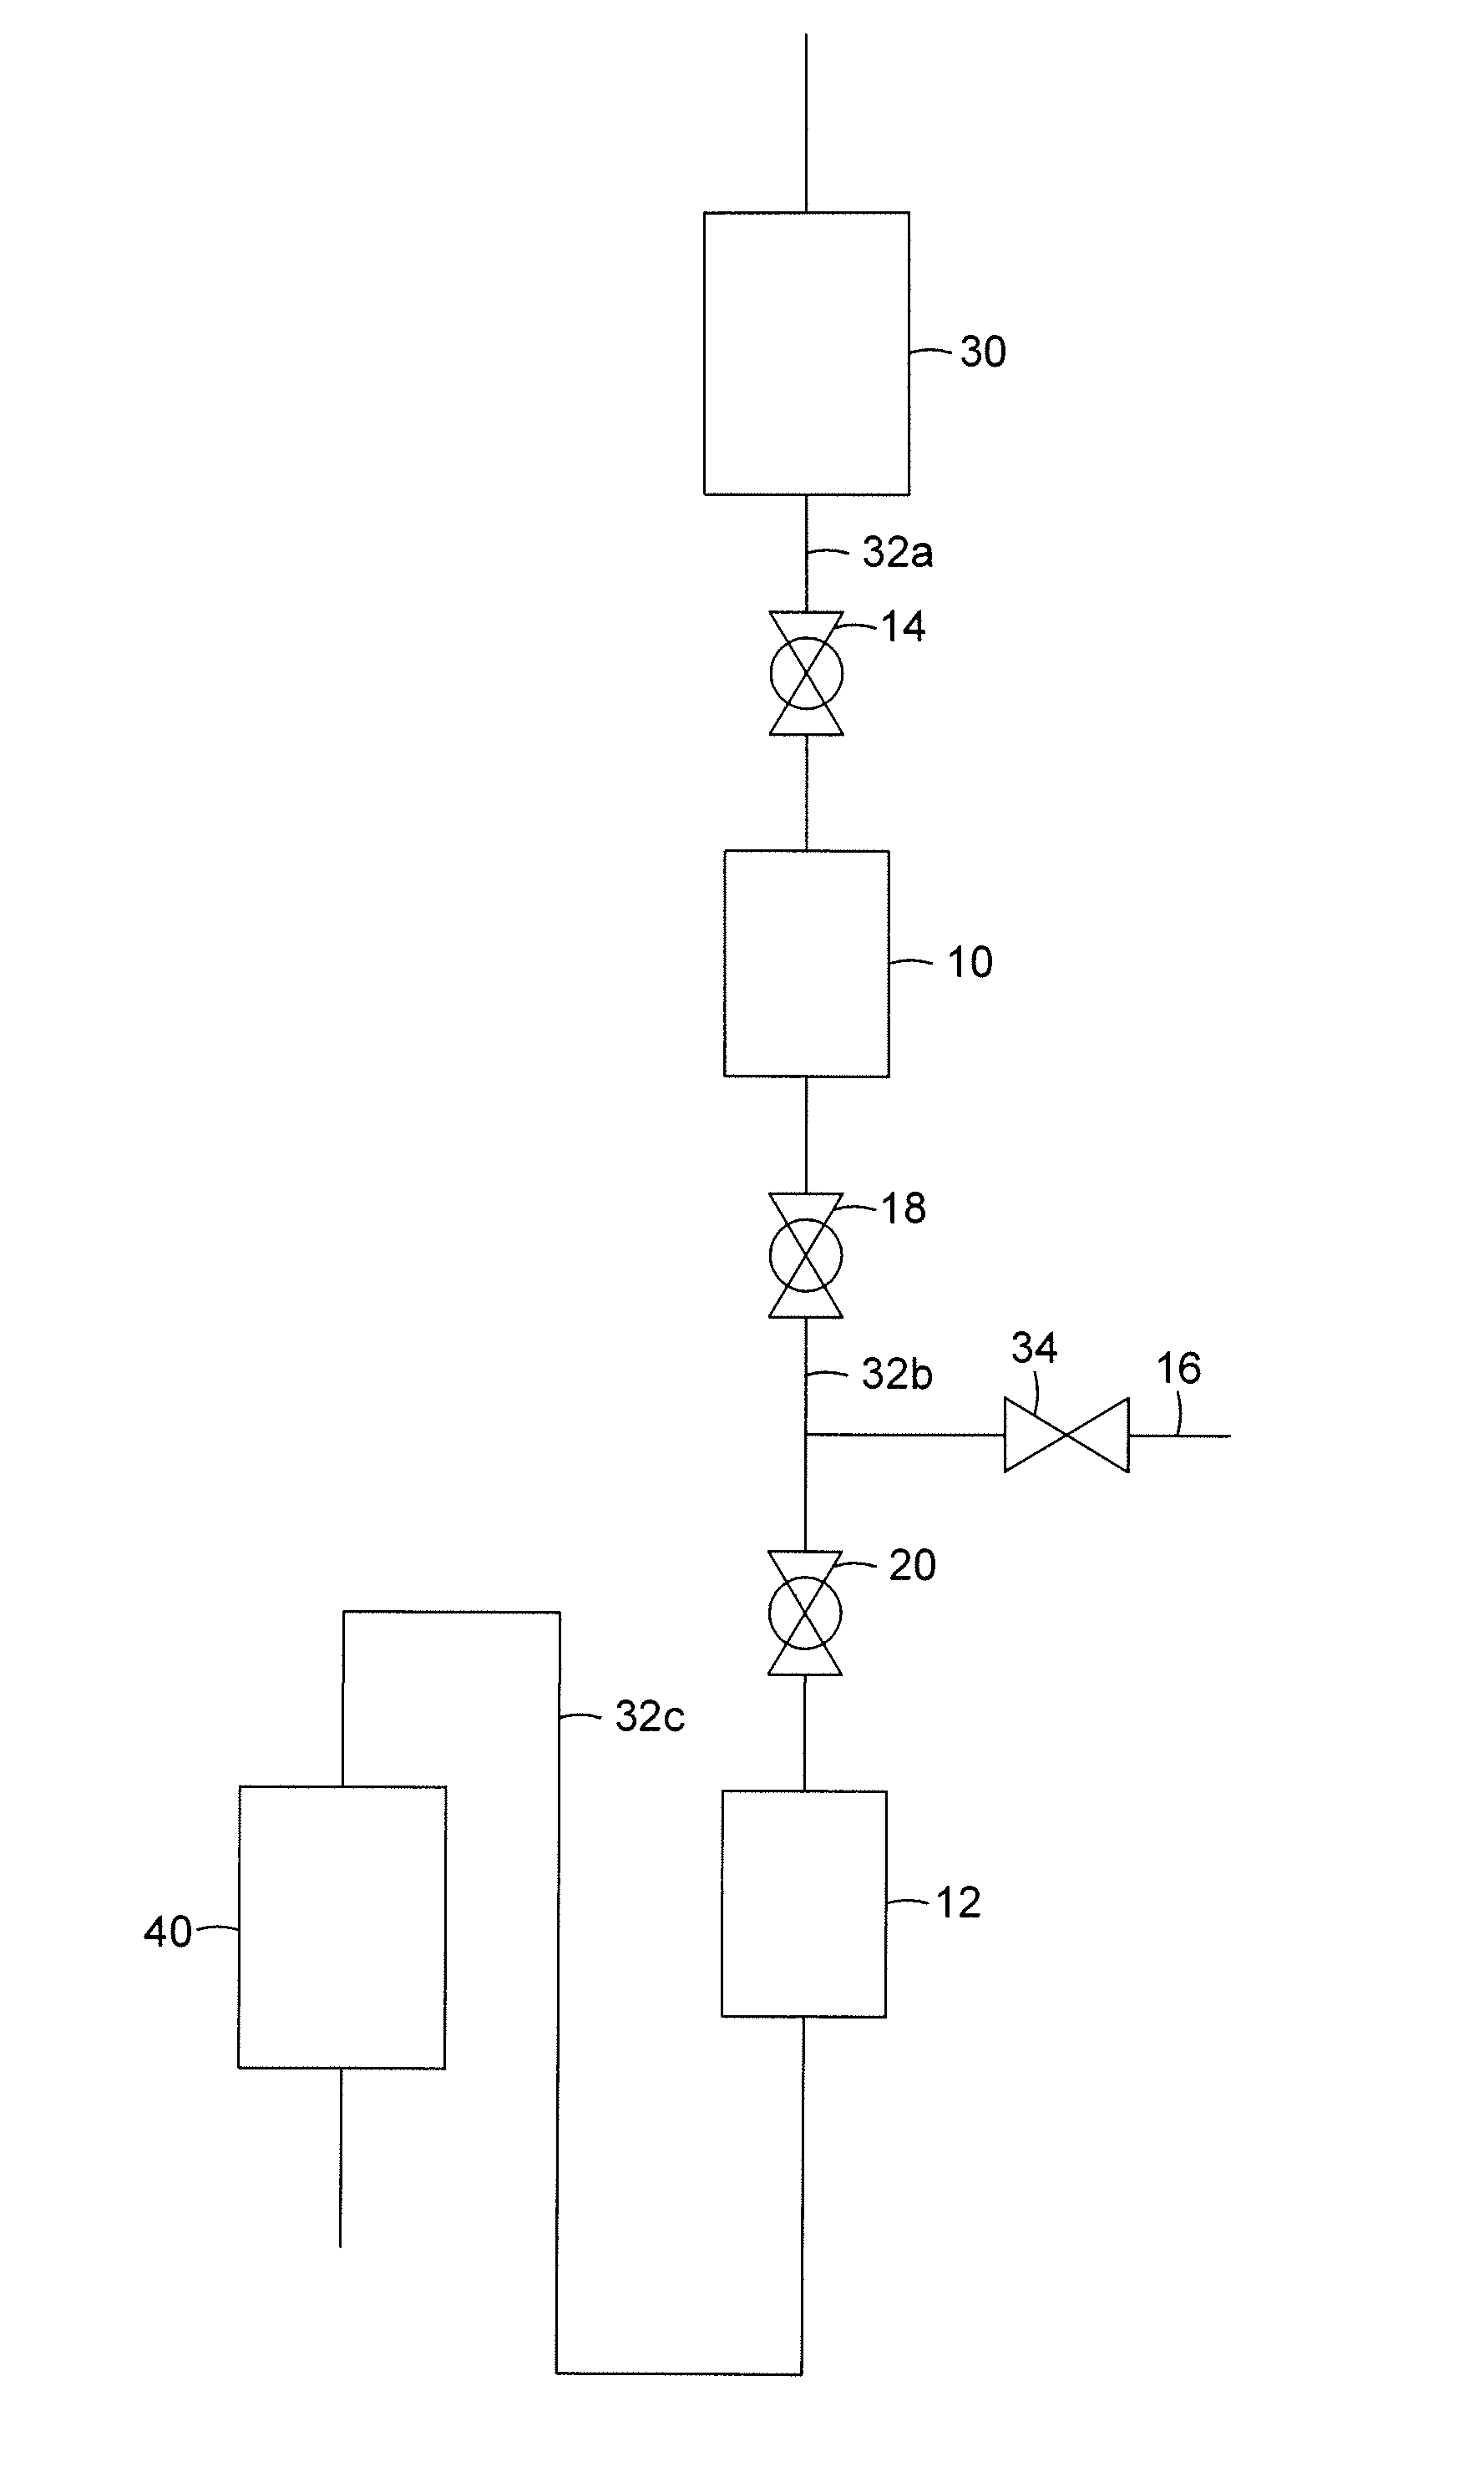 Device to Transfer Catalyst from a Low Pressure Vessel to a High Pressure Vessel and purge the Transferred Catalyst